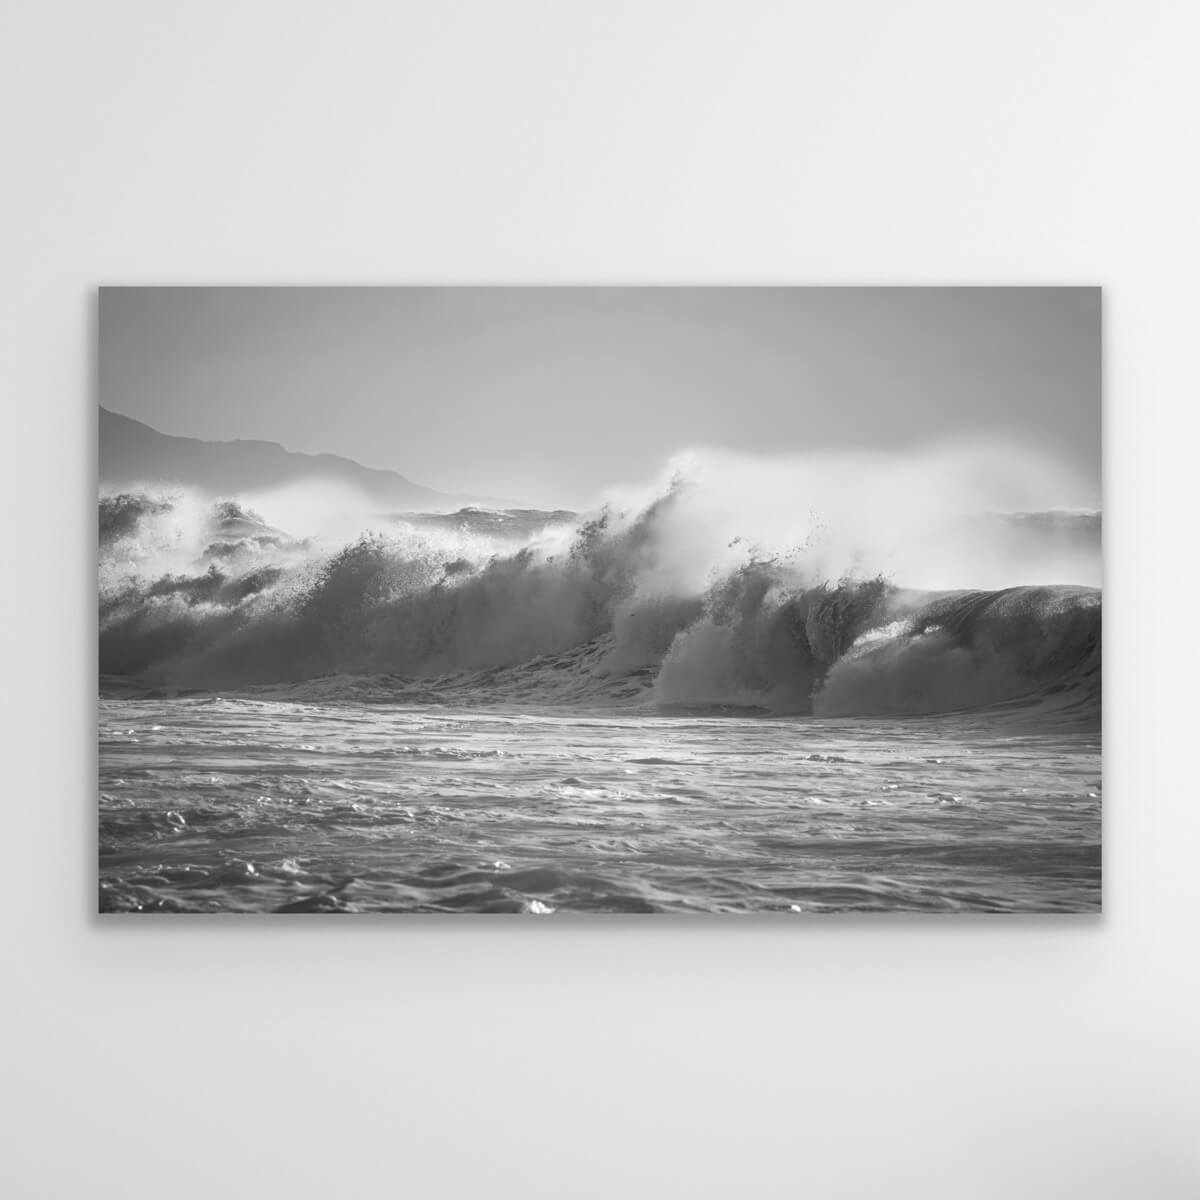 Black and White Rough Sea Wave Breaking Seascape Photograph Gallery Isle of Wight Landscape Prints